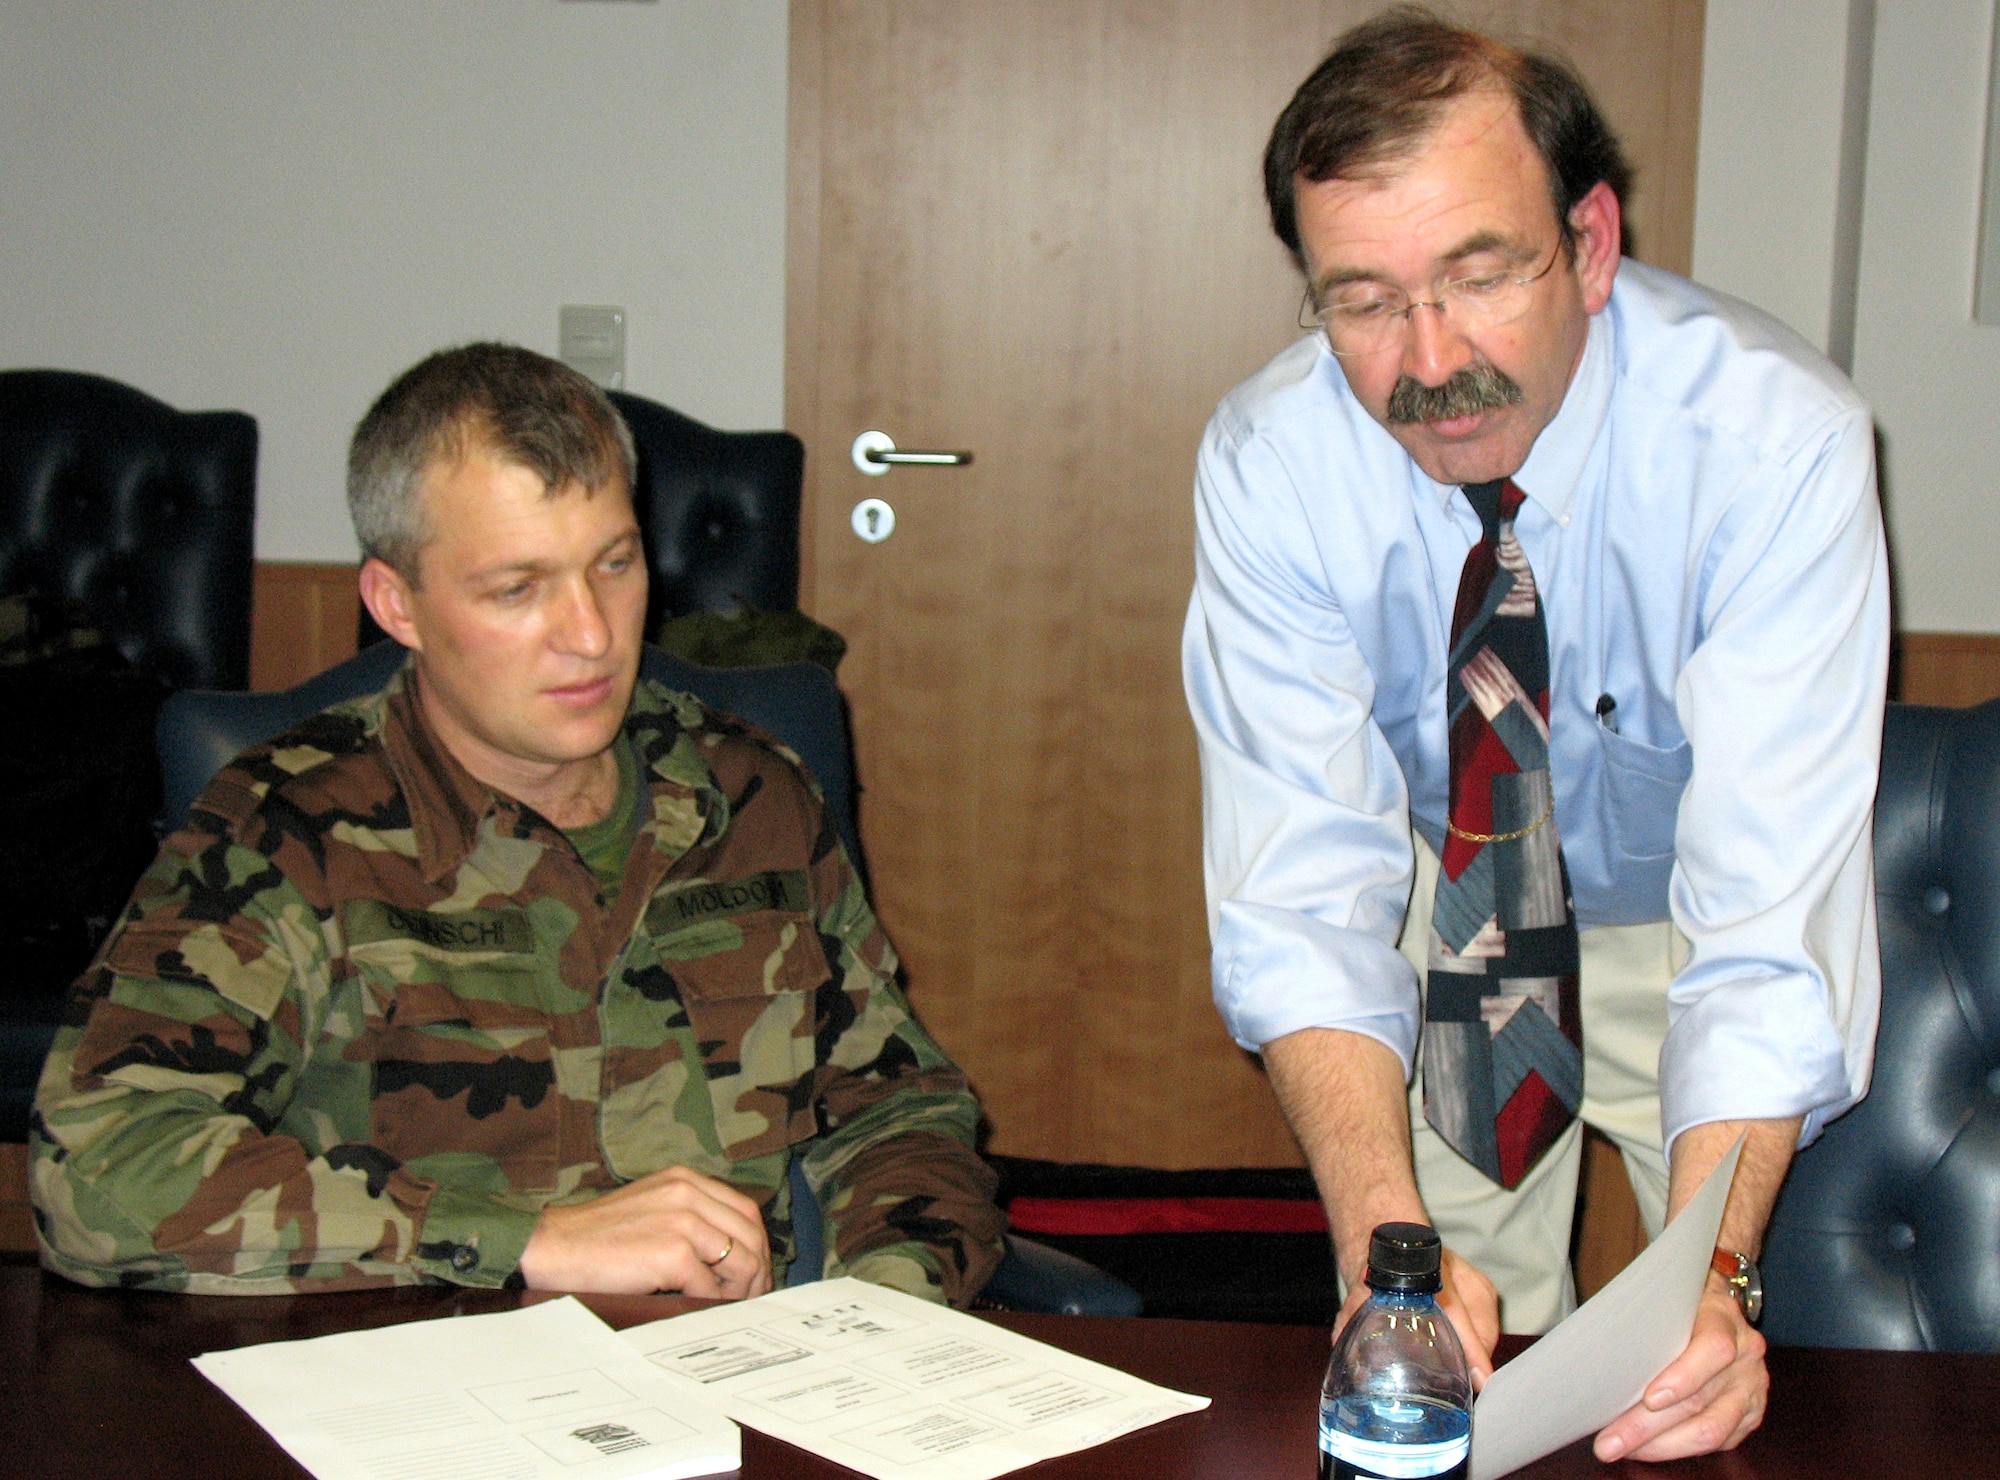 Milan Christi, with the United States Air Forces in Europe personnel office at Ramstein Air Base, Germany, briefs Lt. Colonel Sergiu Ocinschi, a Moldovan army communications officer, about the role of contractors in the Air Force.  Colonel Ocinschi and three other officers from Moldova visited Ramstein to learn about the U.S. Air Force human resources program since their country's military is currently undergoing changes. (U.S. Air Force photo/Staff Sgt. Laura Holzer) 